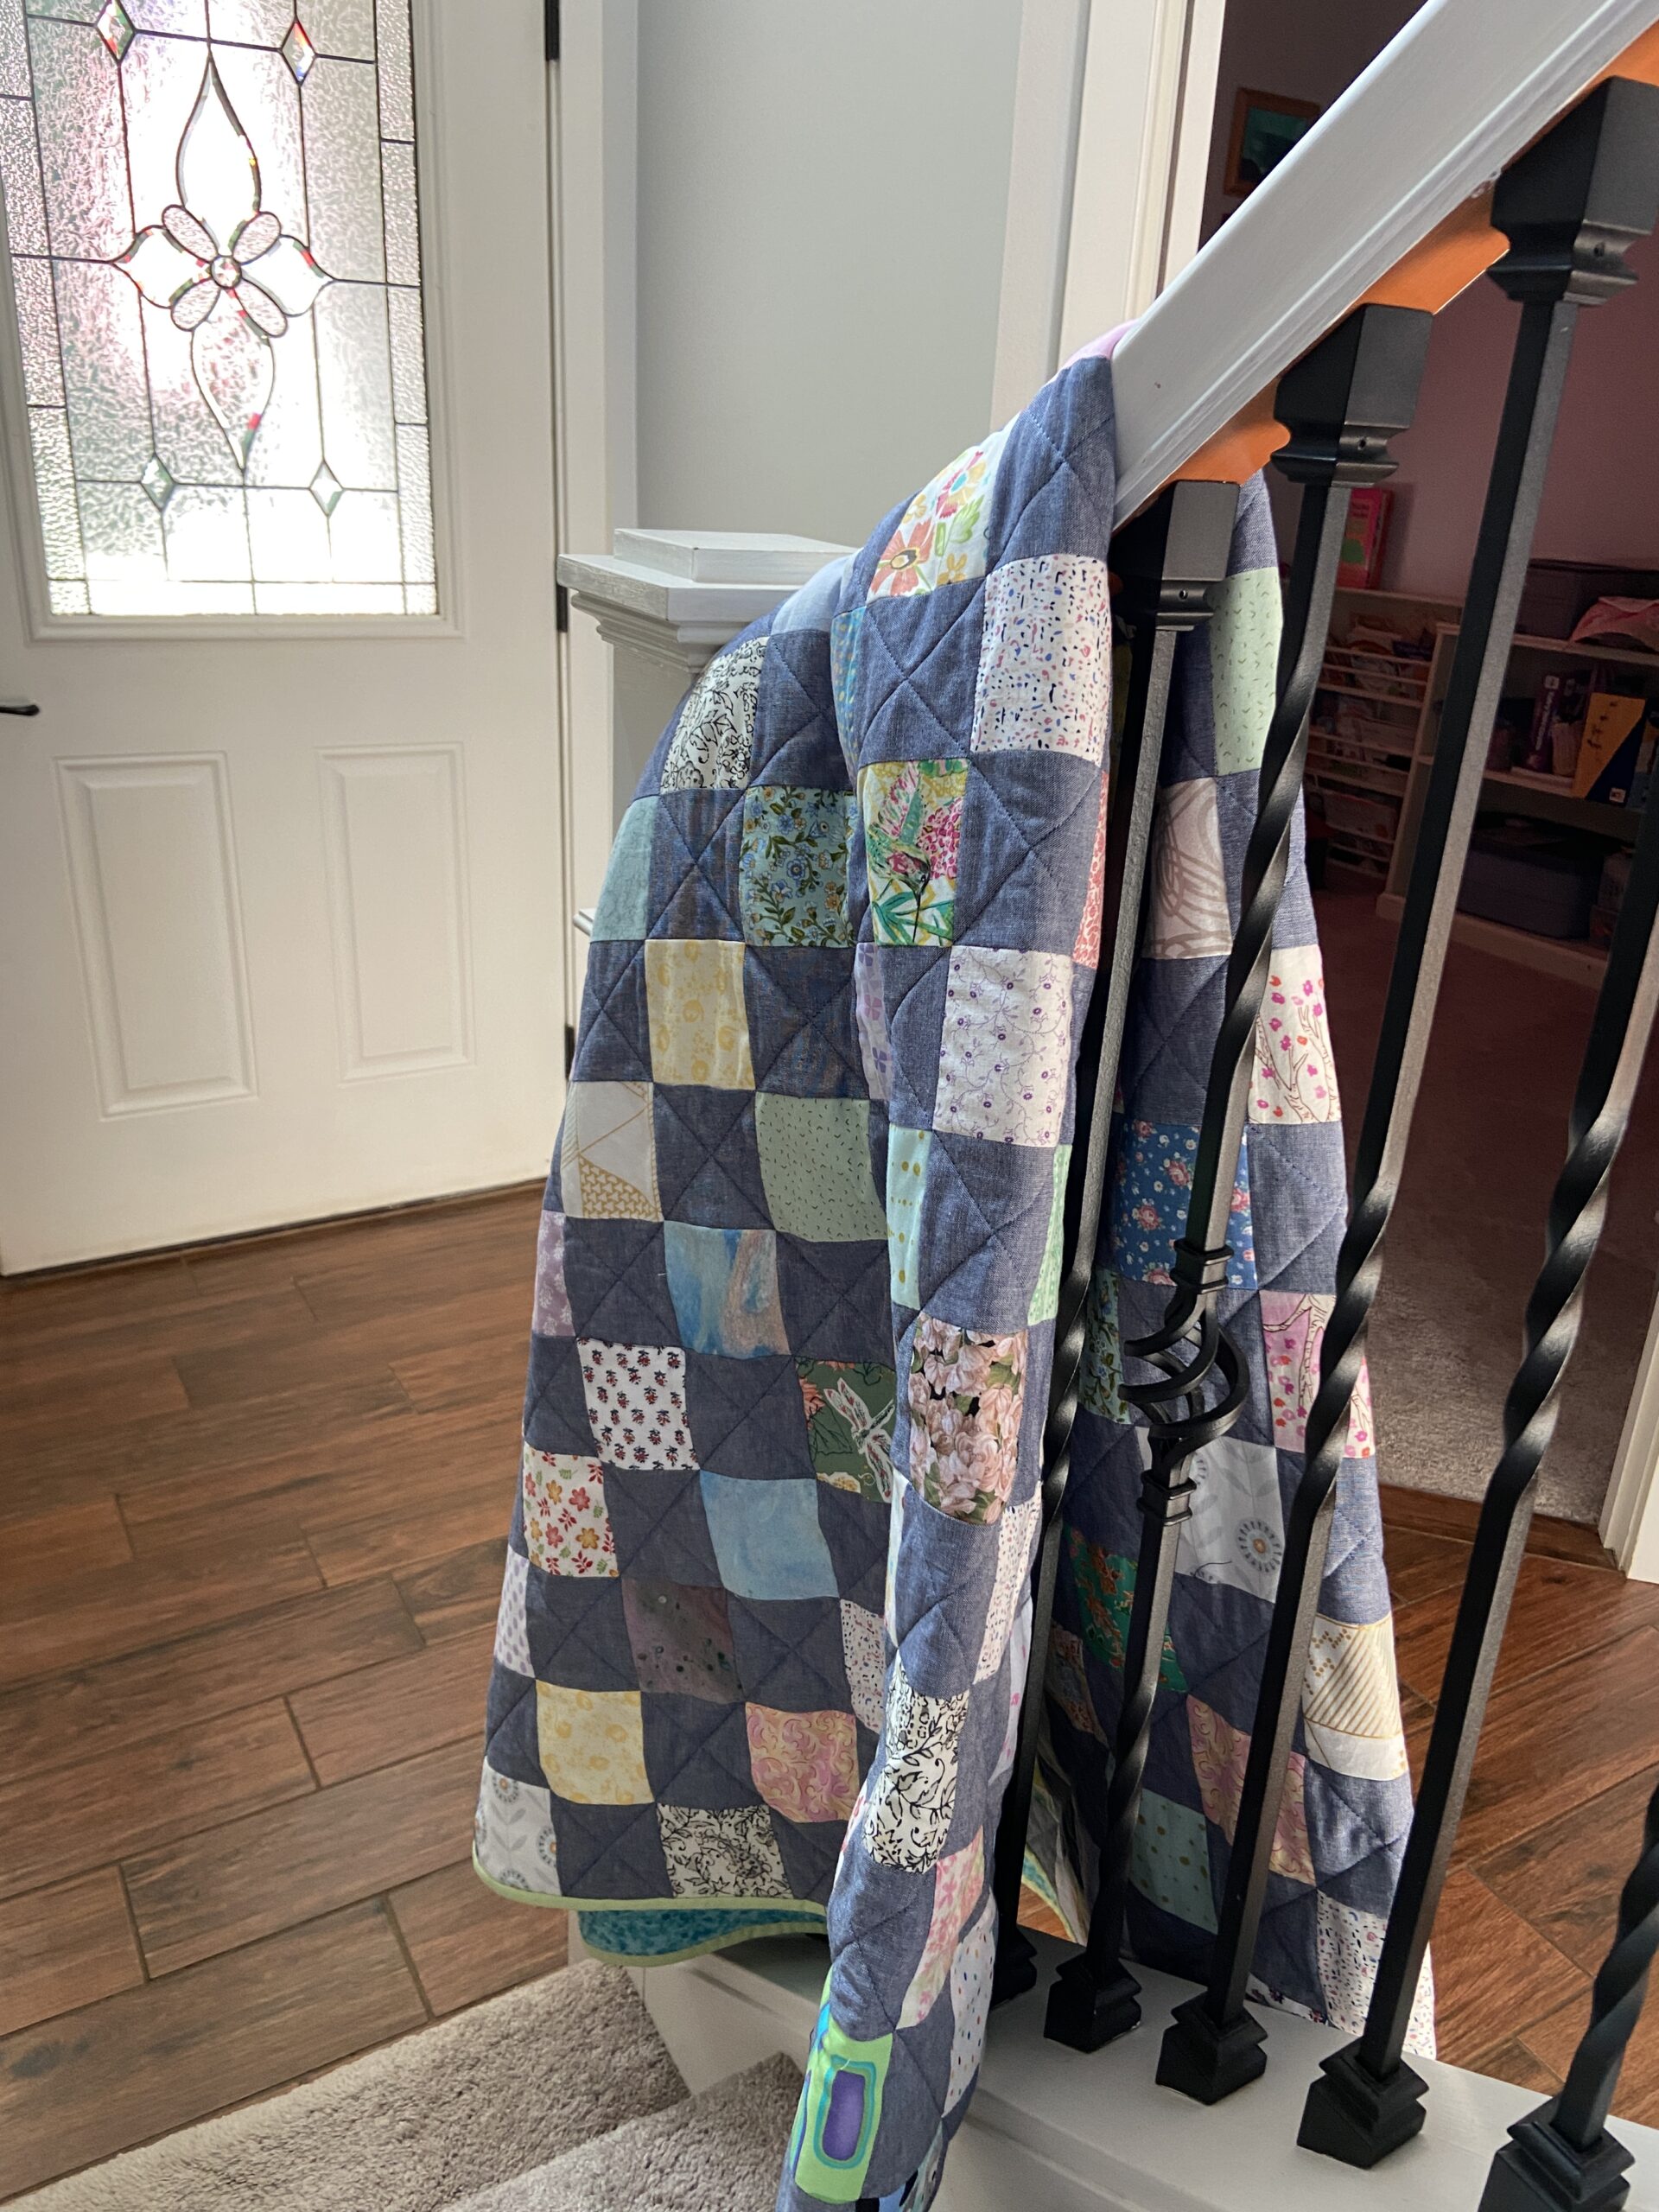 TRADITIONAL QUILTING PROJECTS
BY NEEDLE AND FOOT